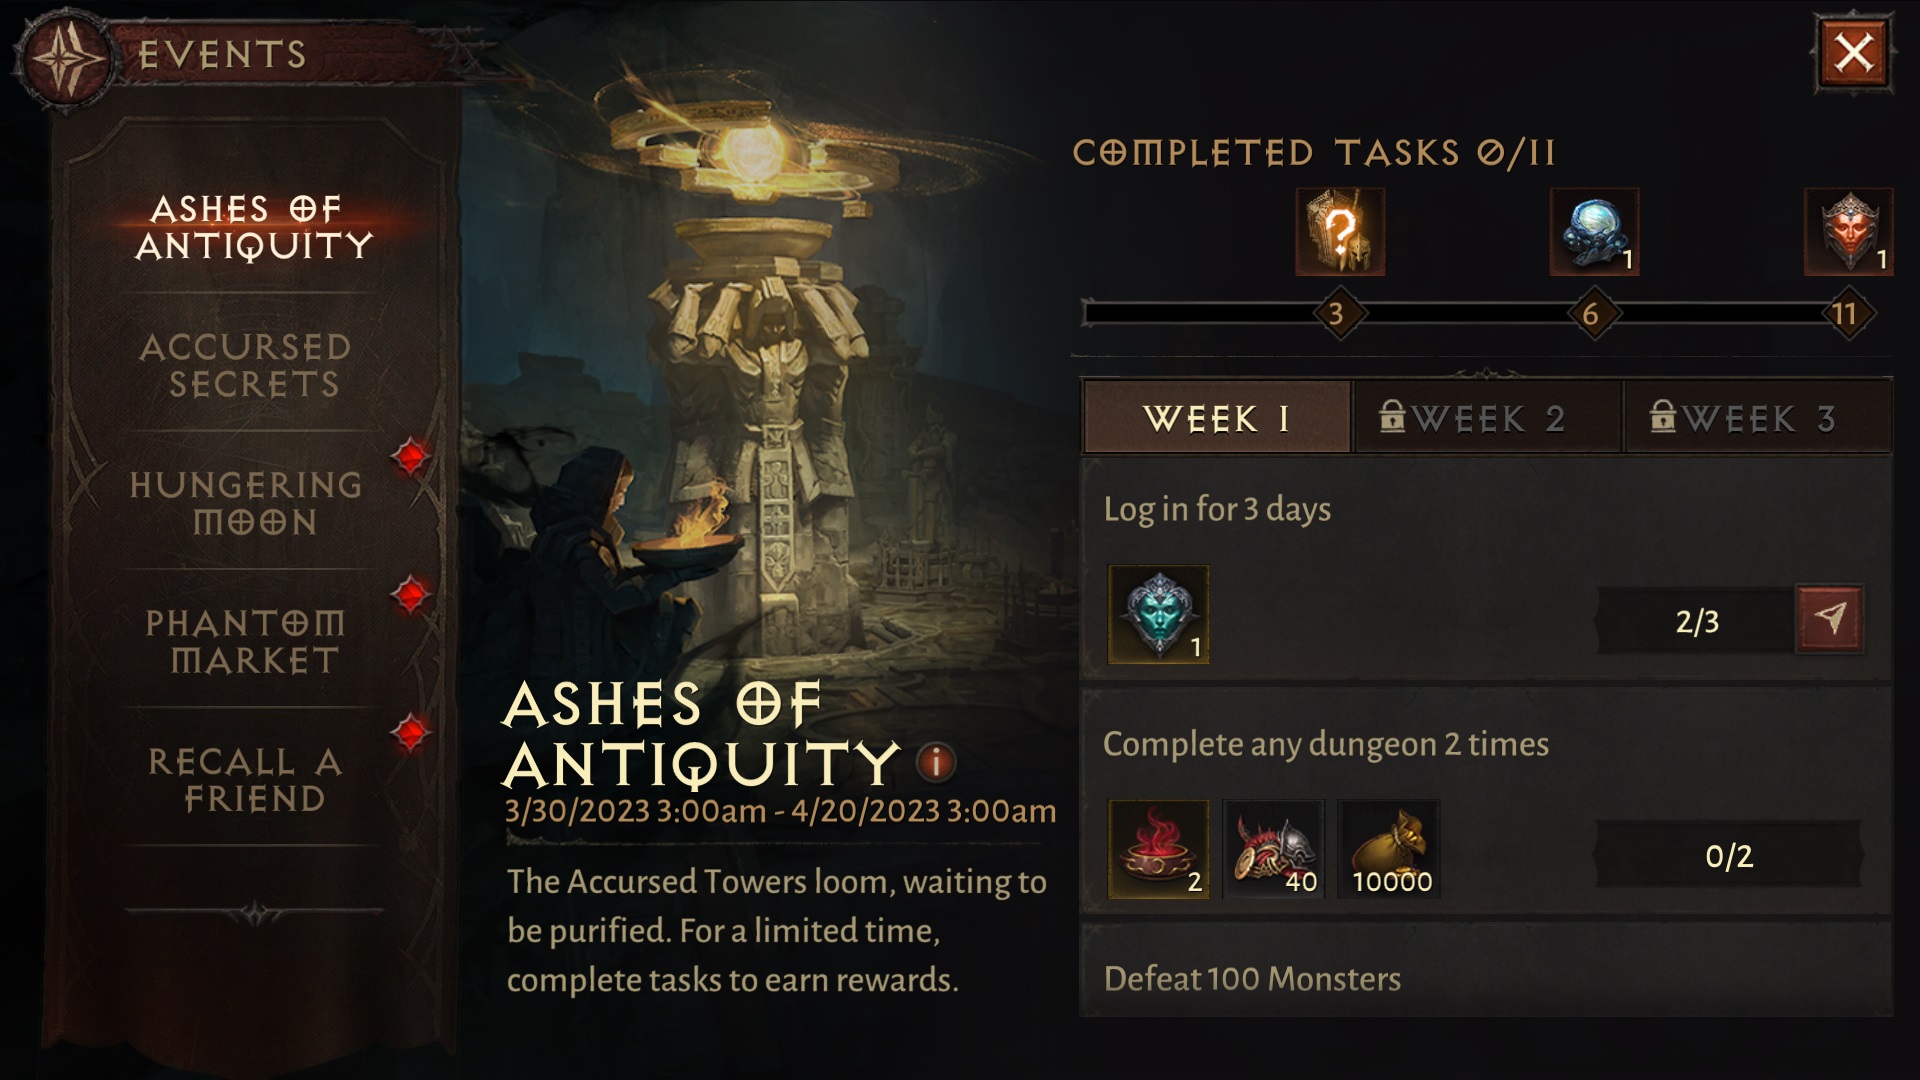 Diablo Immortal: Ashes of Antiquity Event Guide